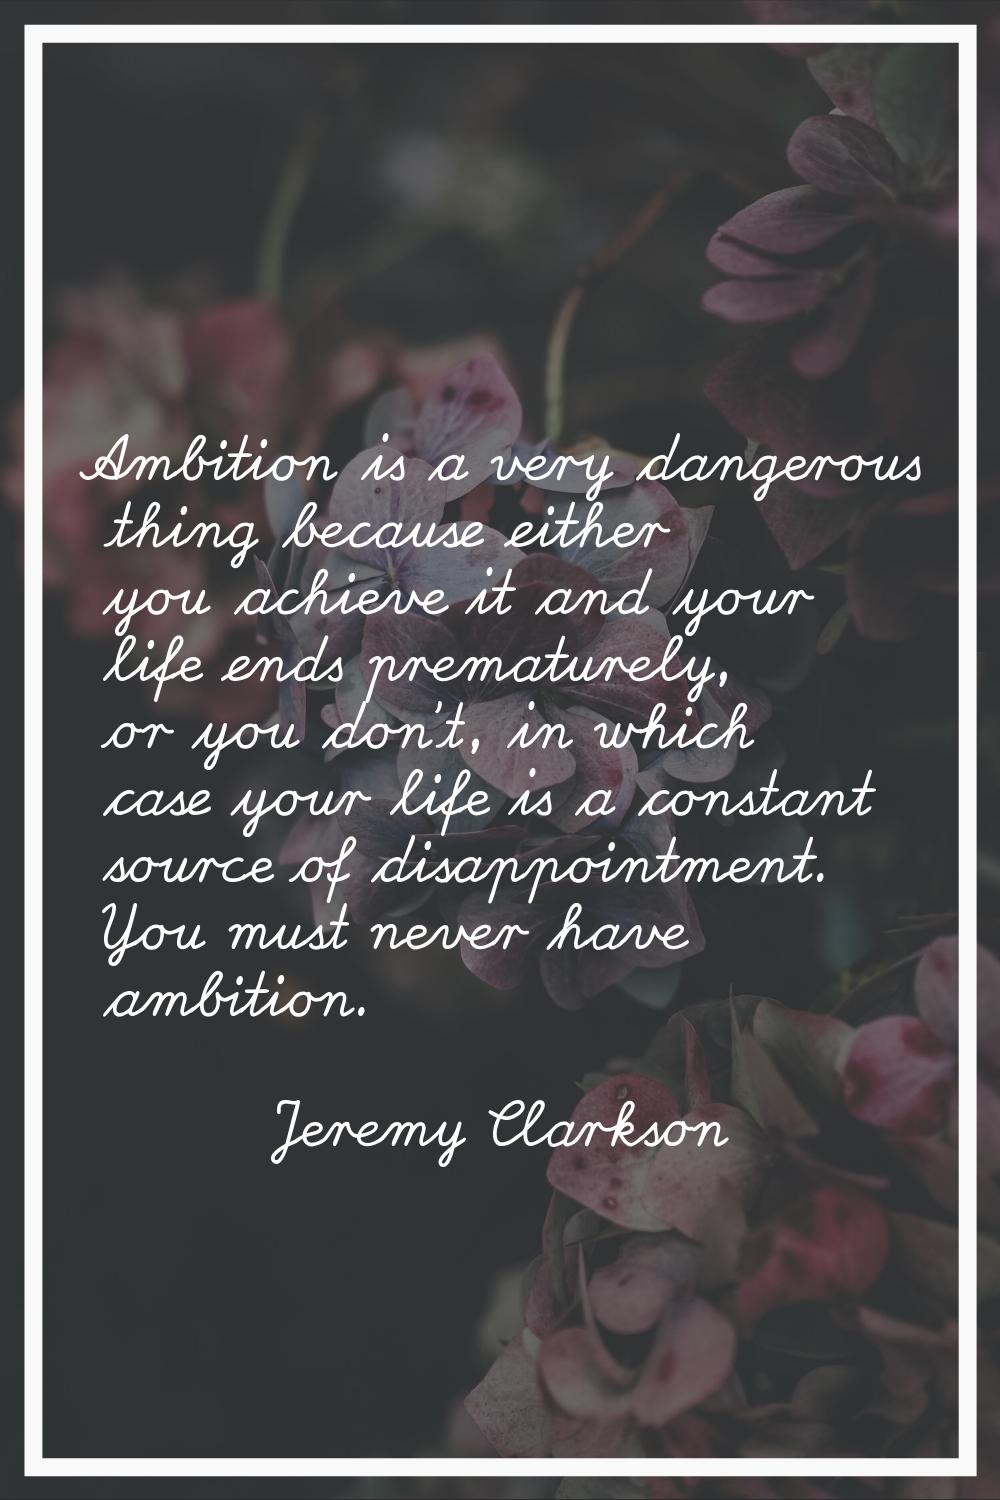 Ambition is a very dangerous thing because either you achieve it and your life ends prematurely, or